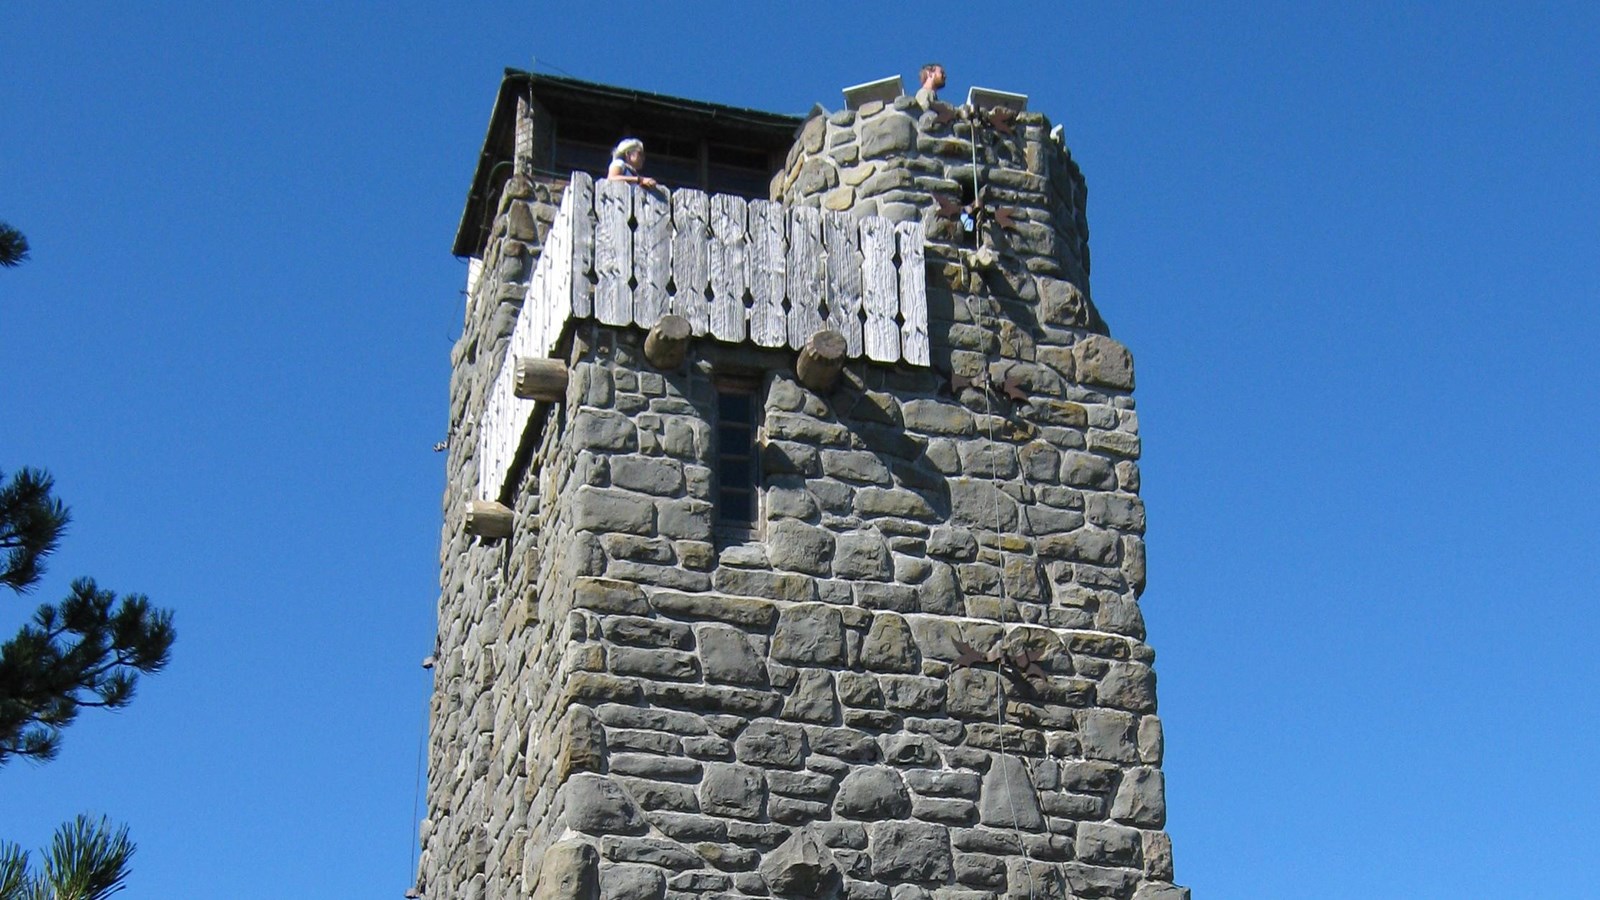 Color photograph of a stone tower with people in a cupola at the top on a clear day